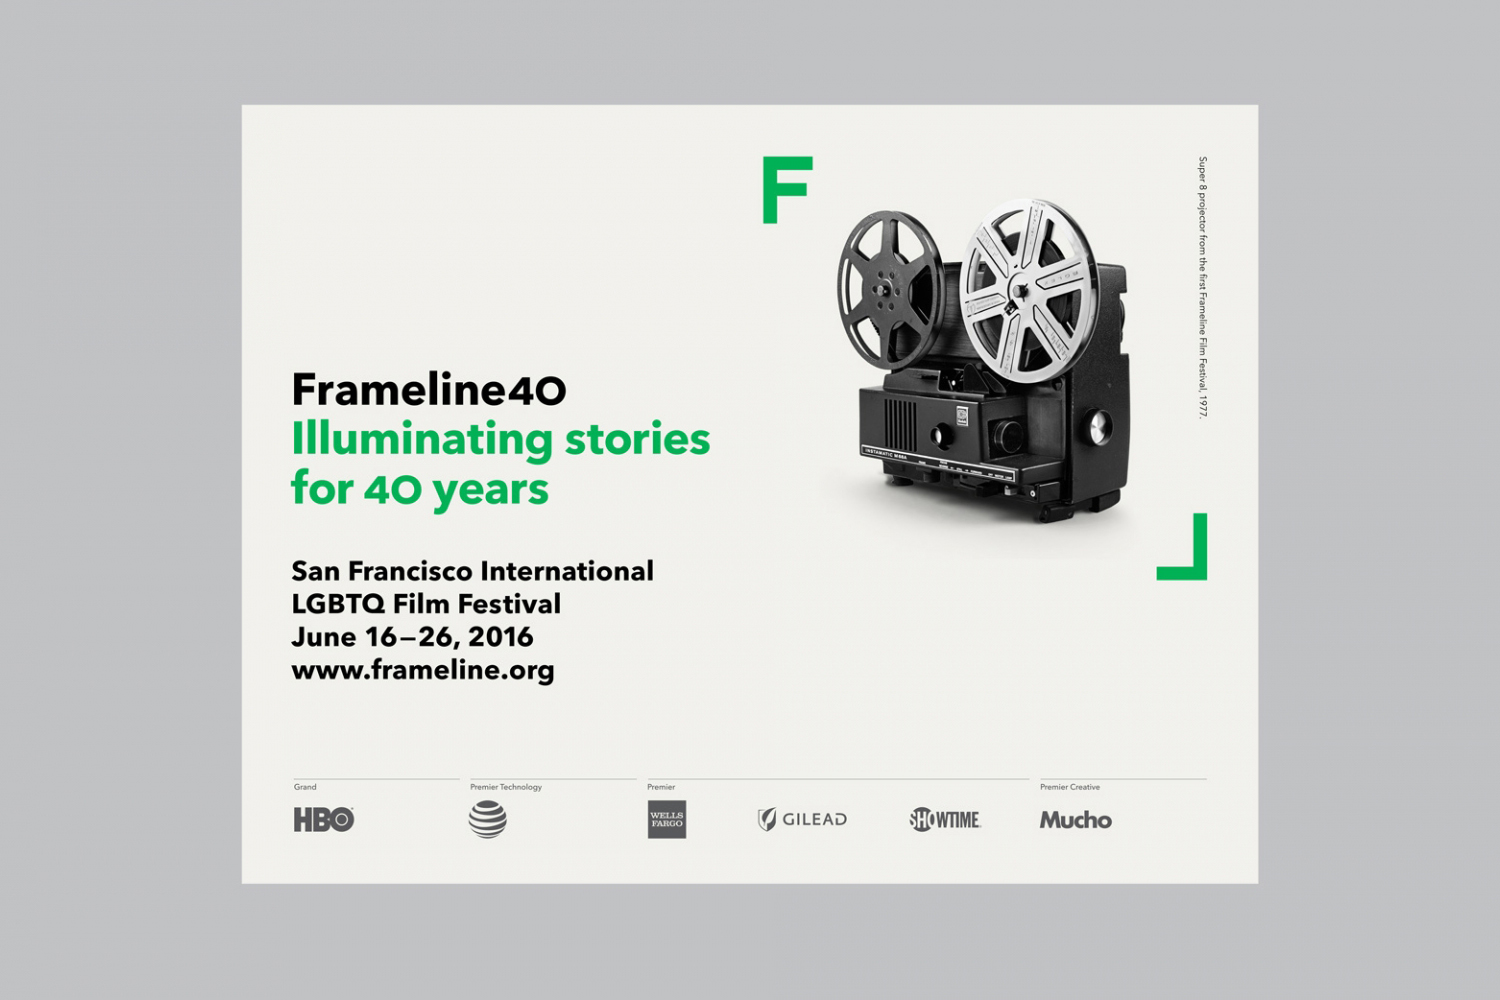 Brand identity and poster designed by Mucho for San Francisco based LGBT film festival and nonprofit arts organisation Frameline.